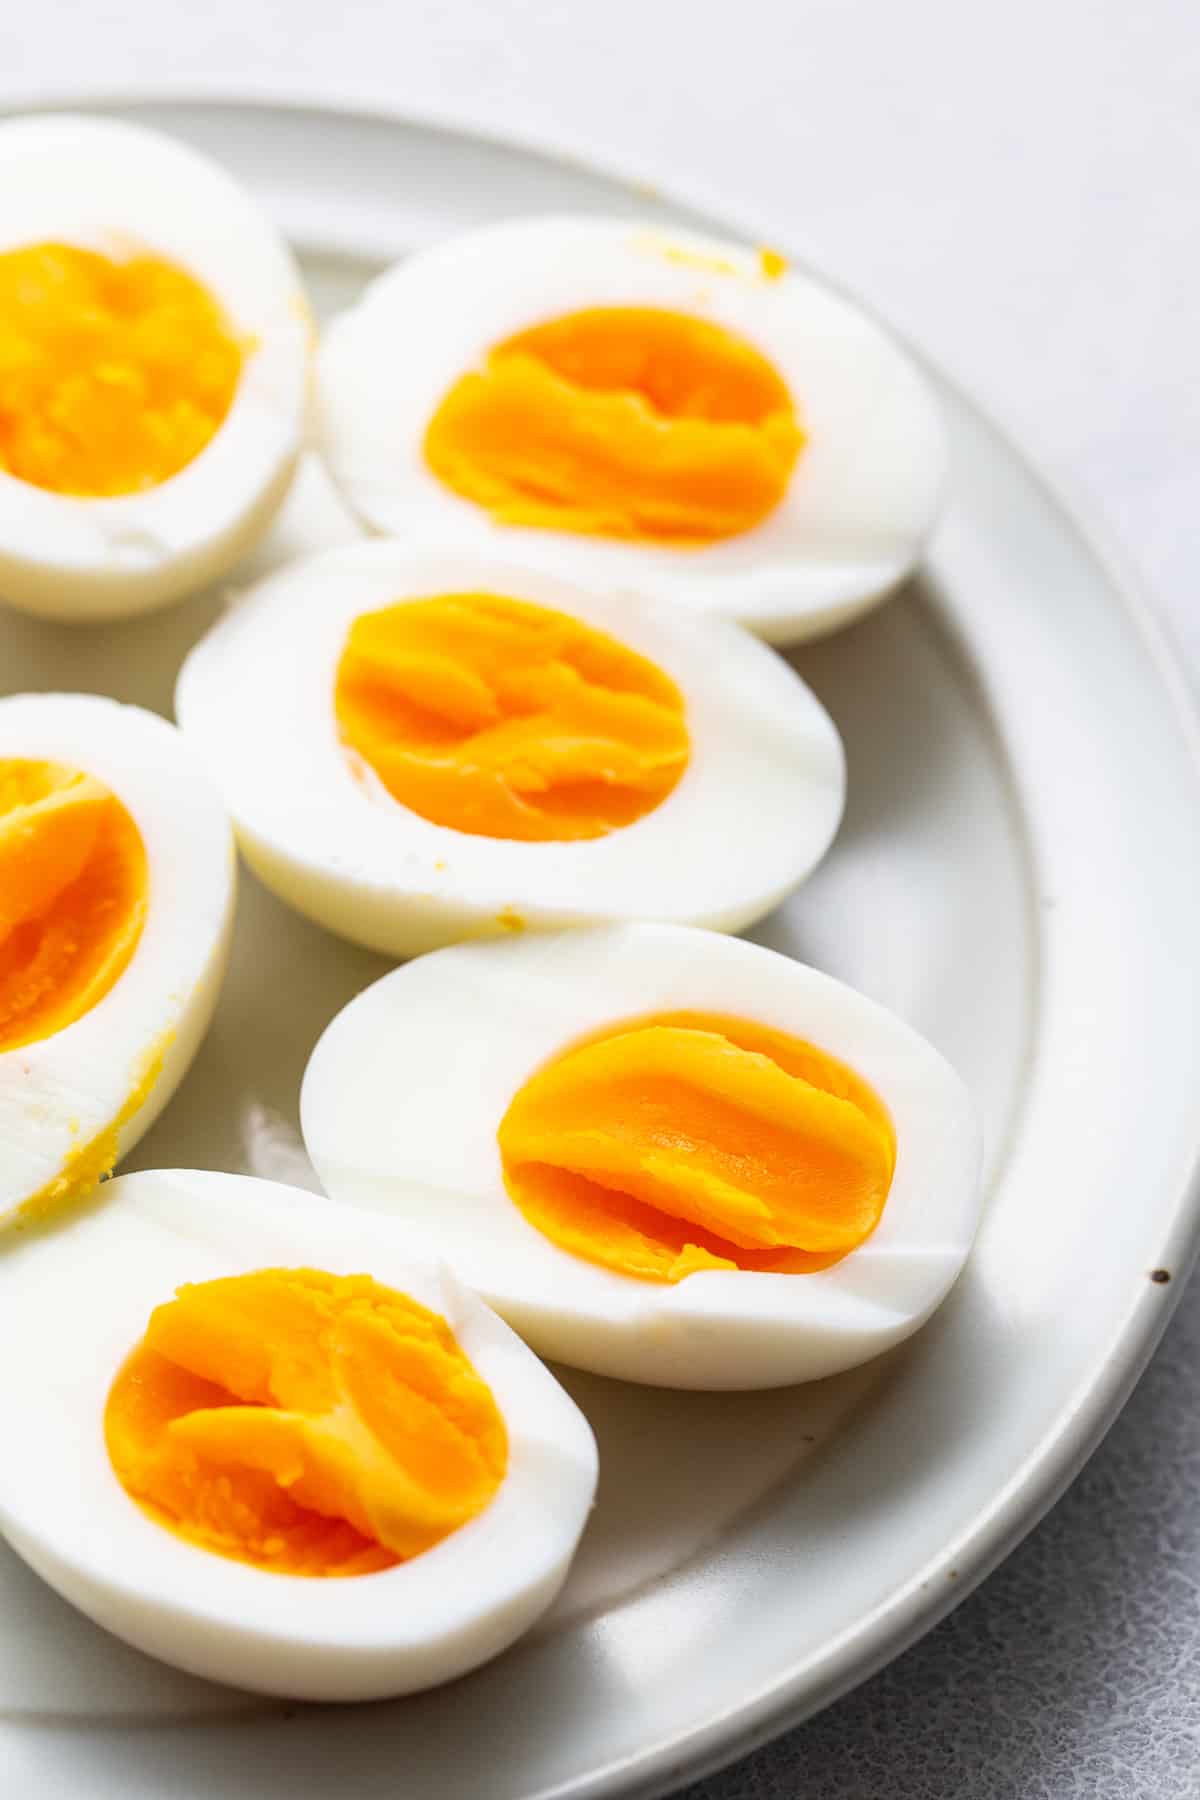 Air fryer hard boiled eggs on a plate.